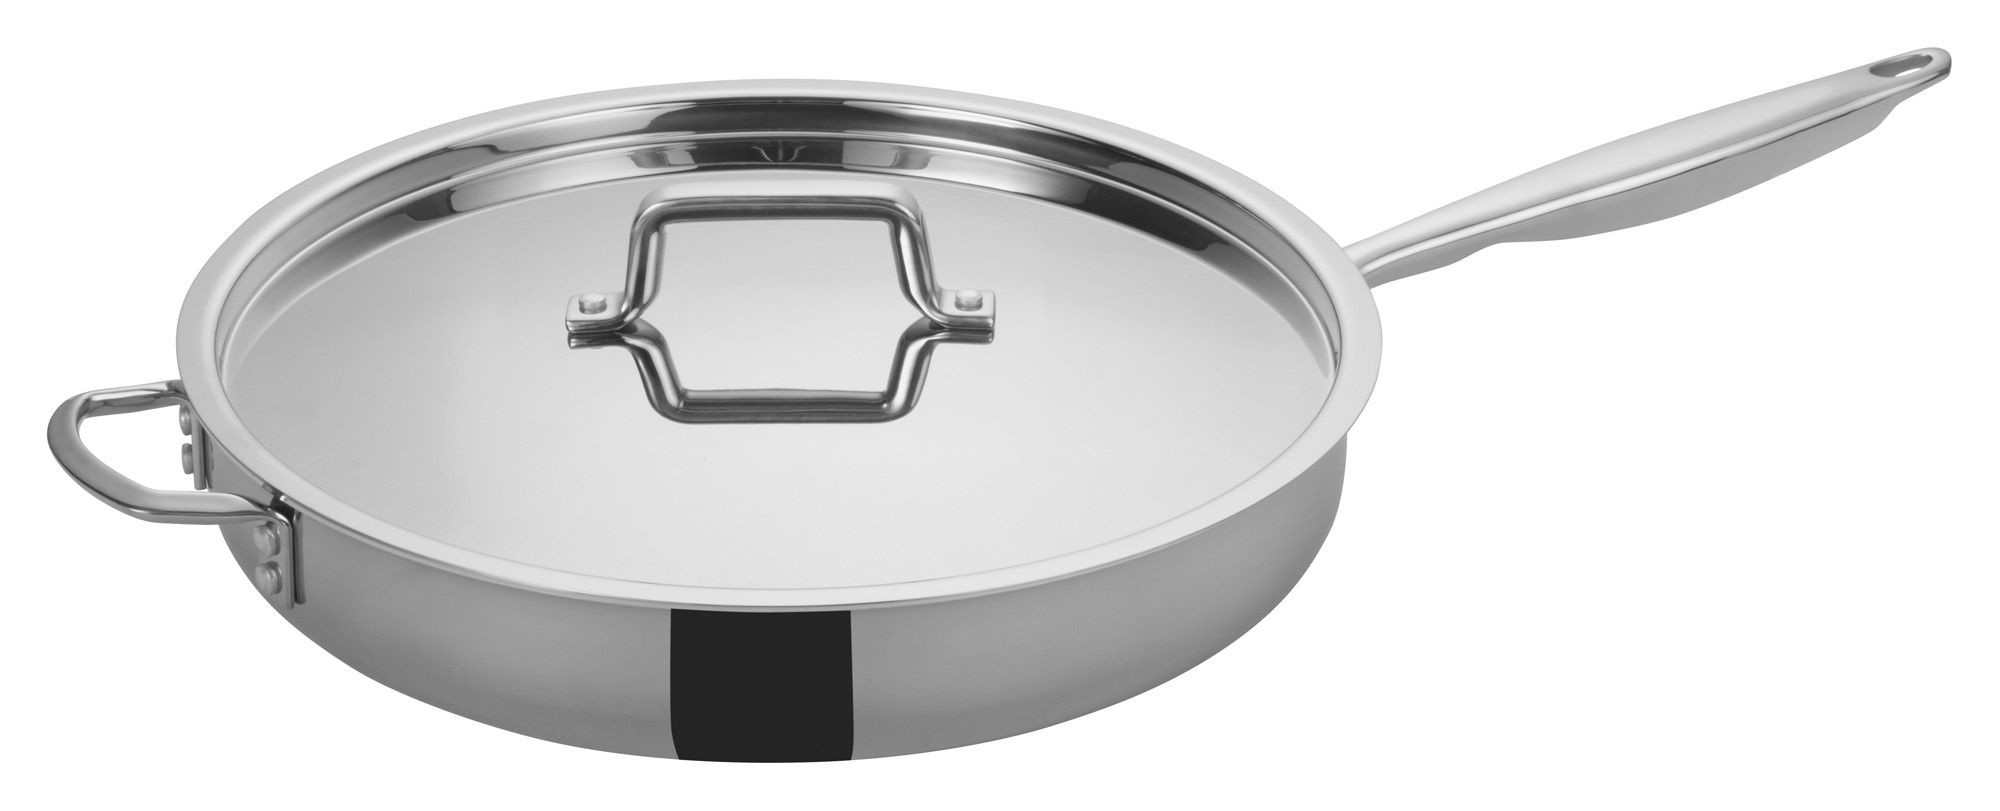 Winco TGET-7 Tri-Ply Stainless Steel 7 Qt. Saute´ Pan with Cover, Helper Handle